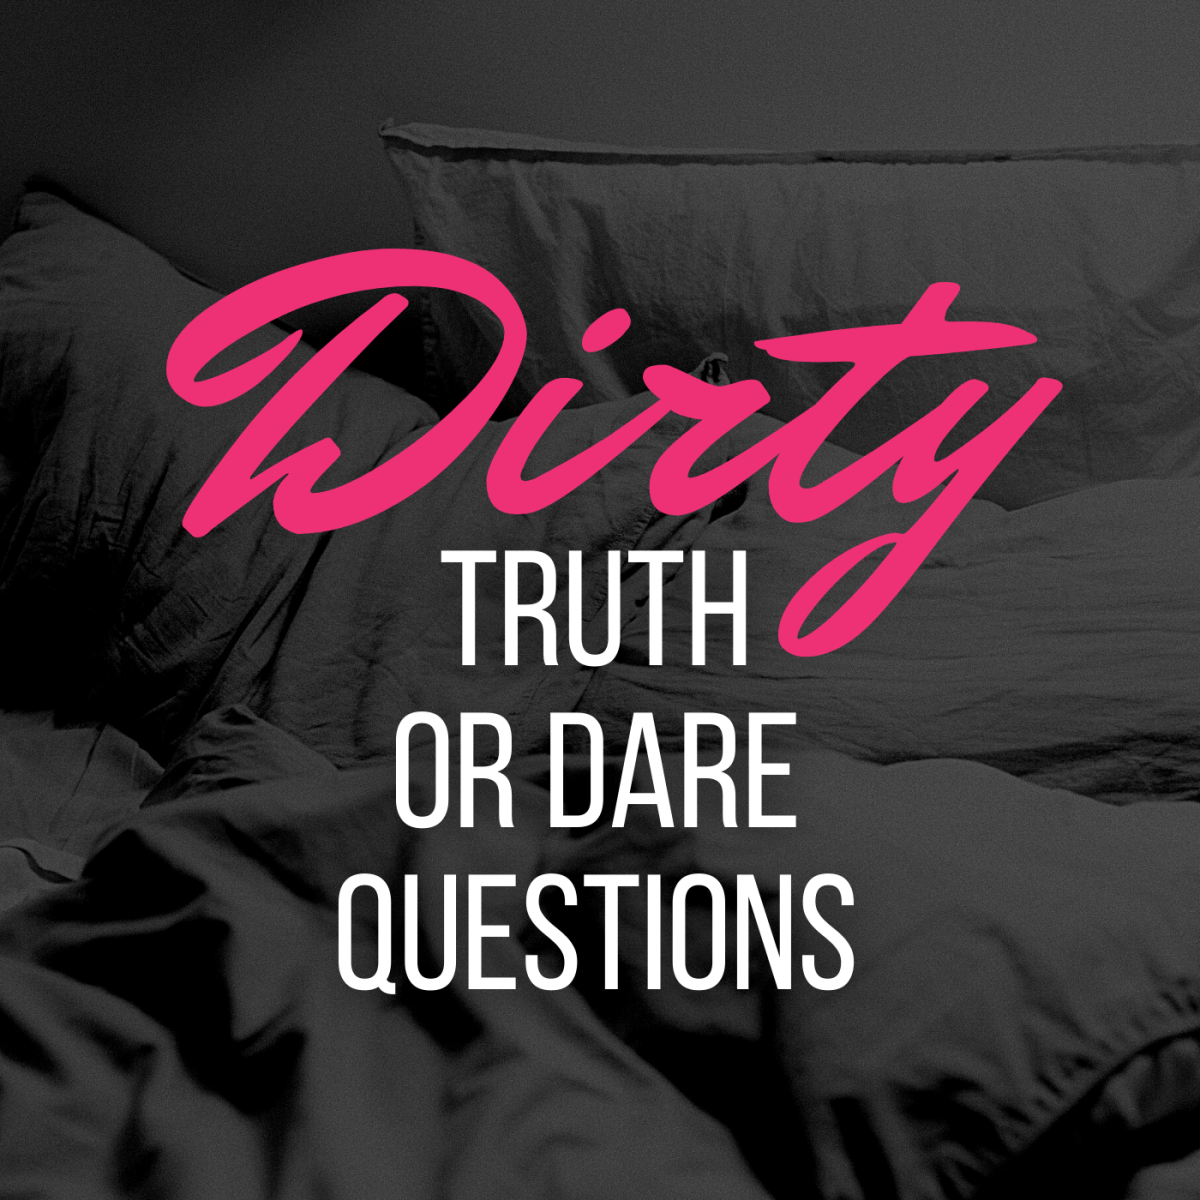 Best of Coed truth or dare